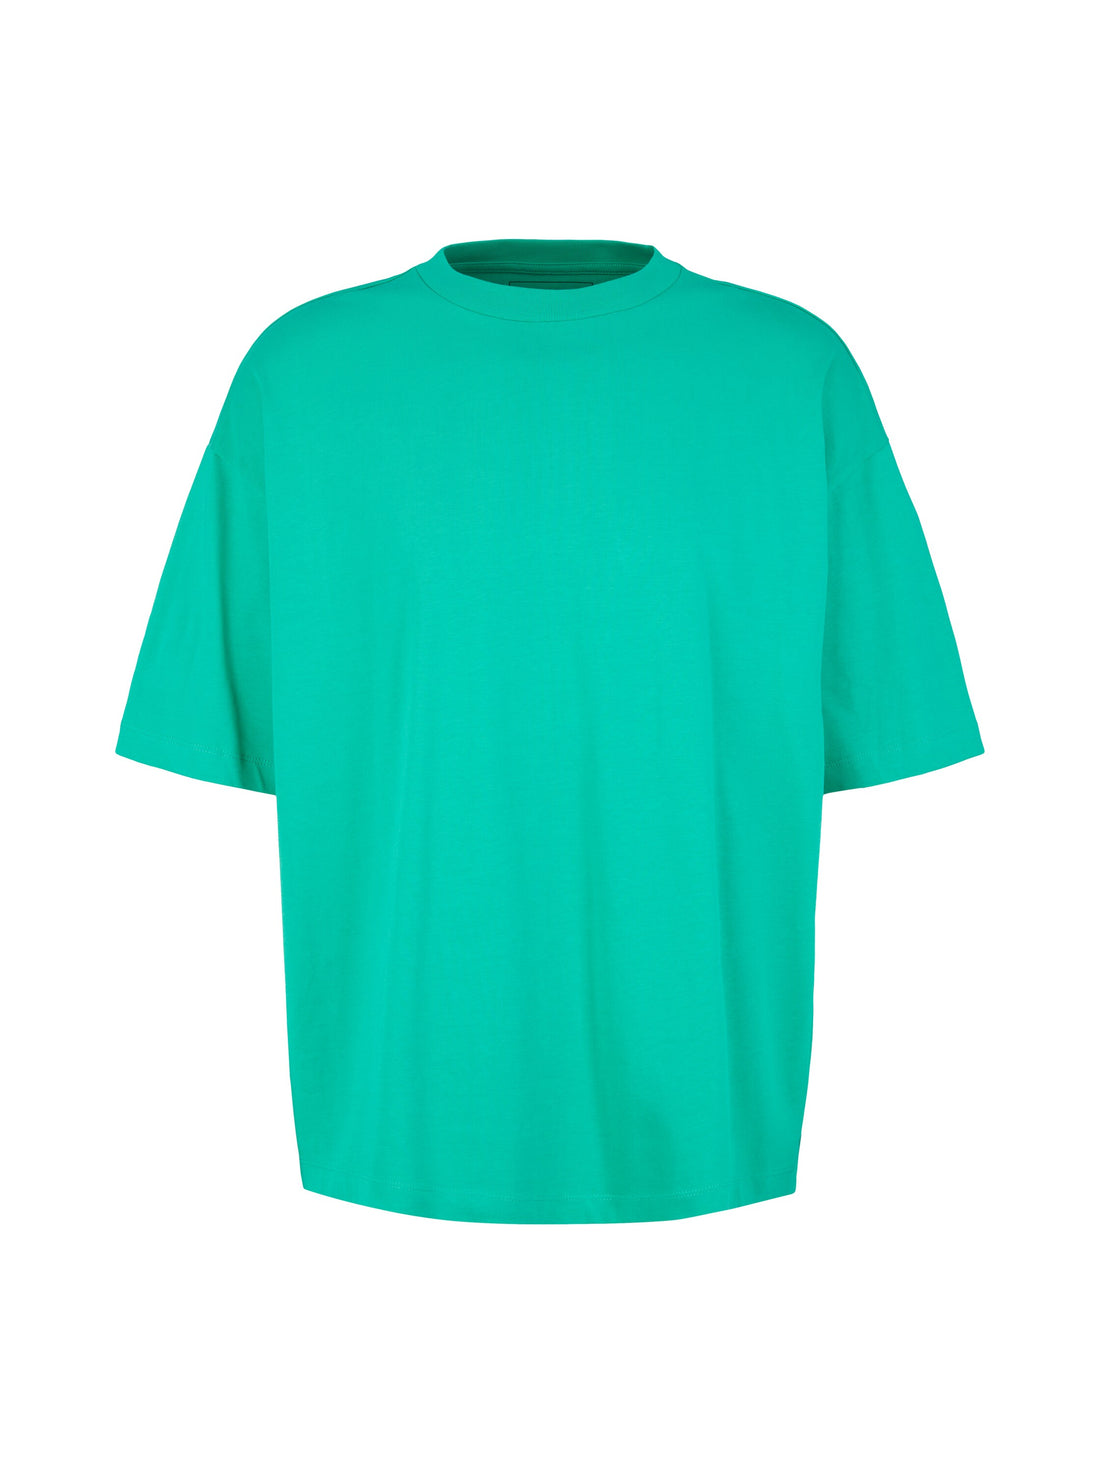 Green Over-sized Short Sleeve T-Shirt